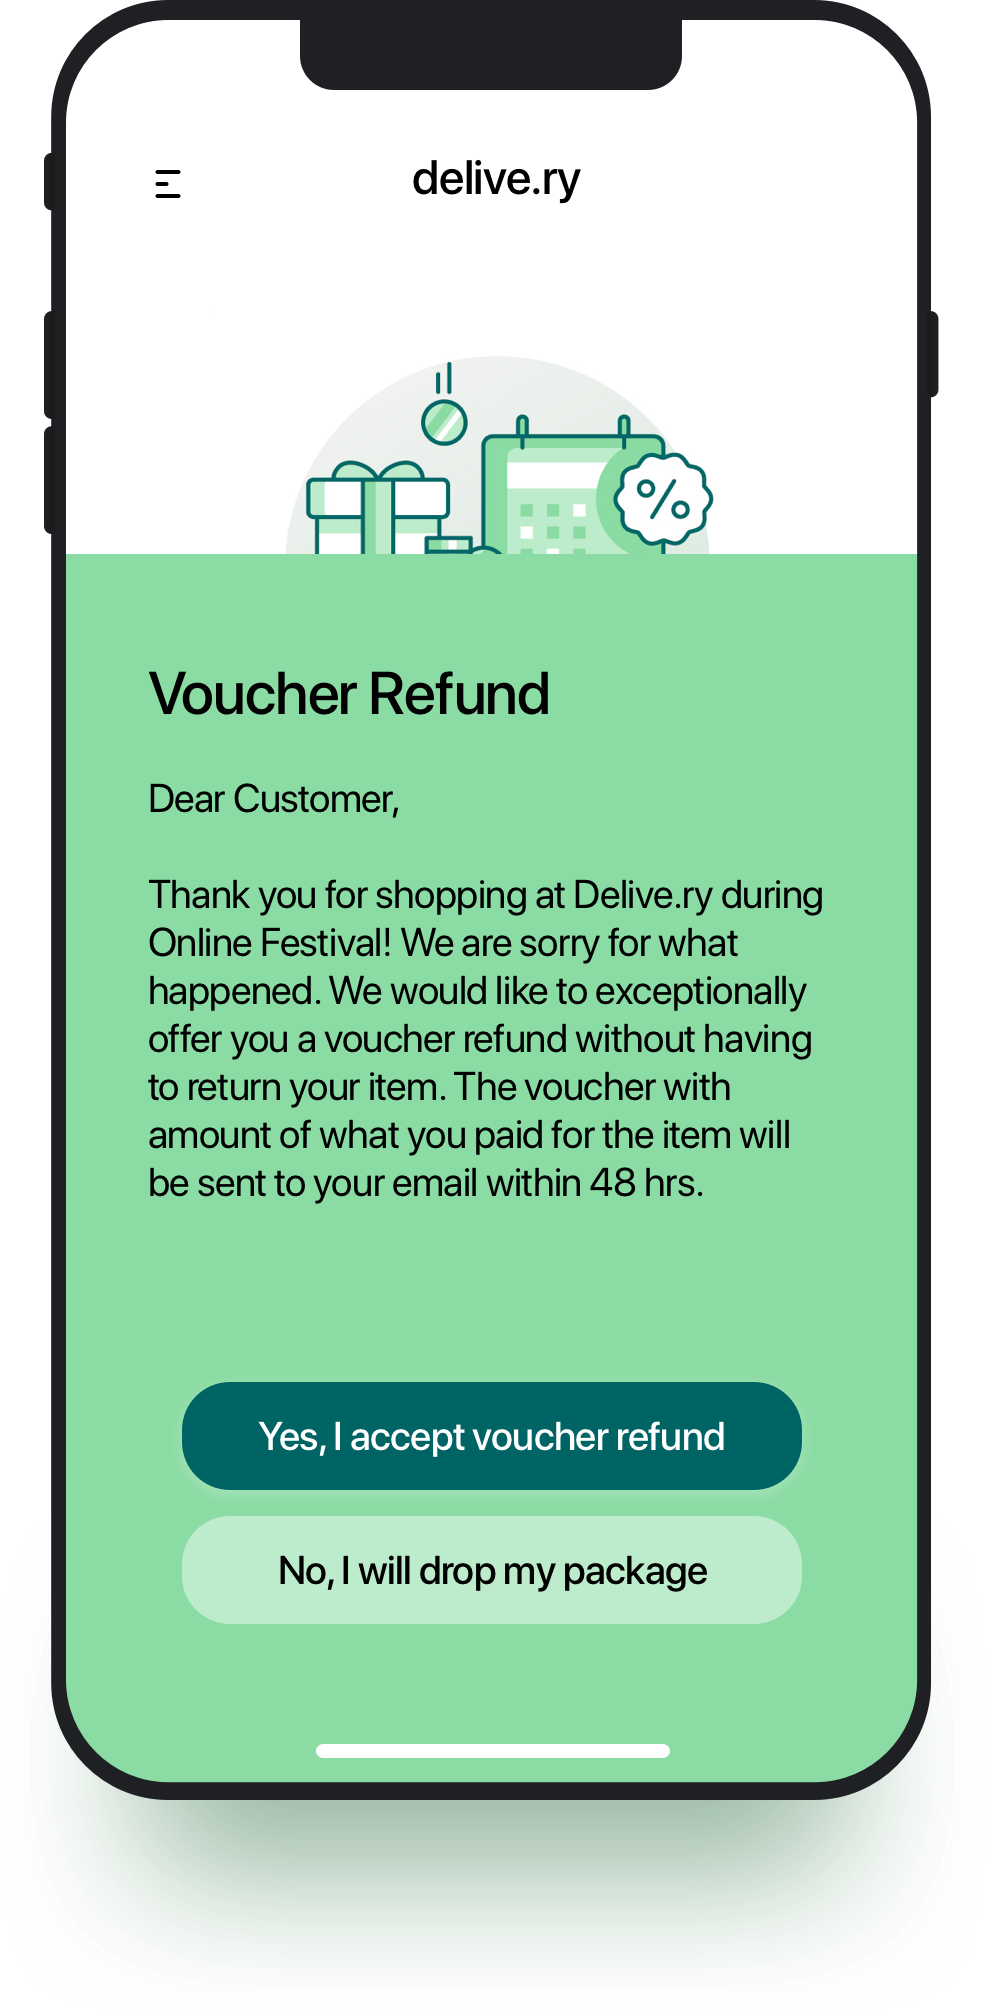 sms-engage-refund-voucher.png